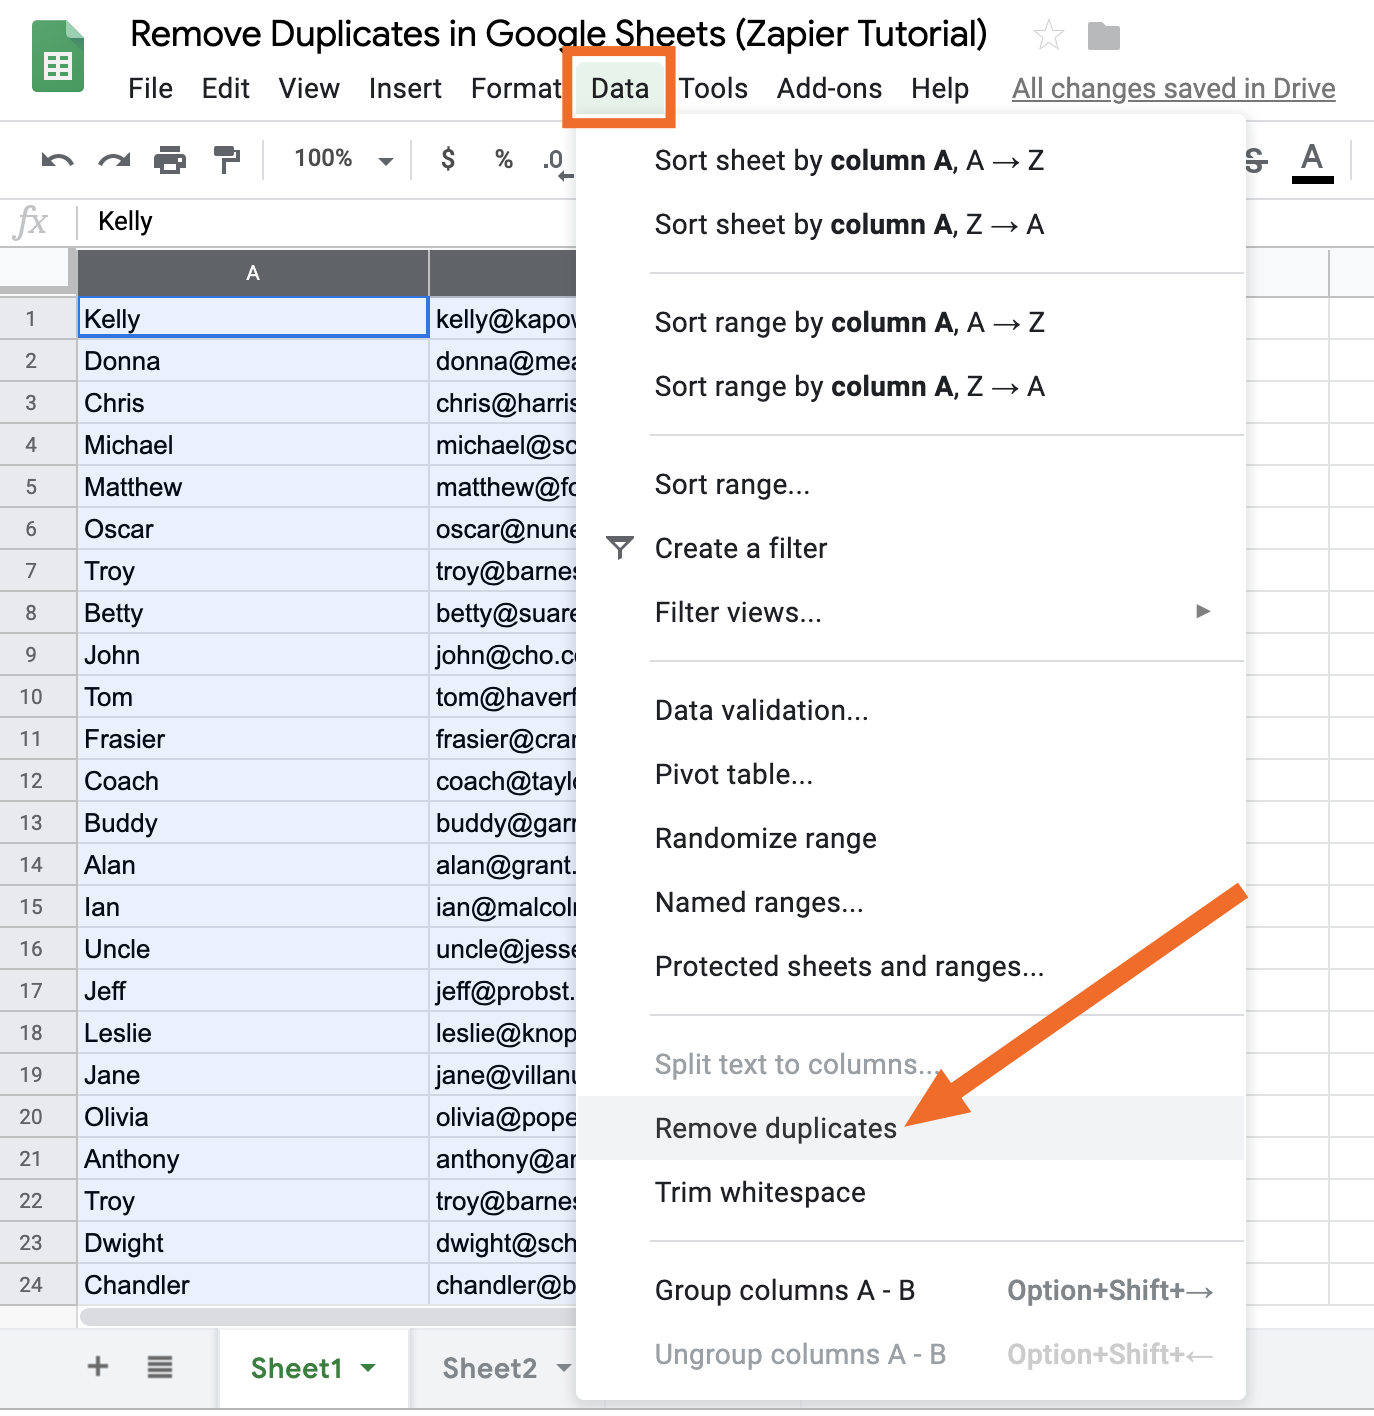 How to find and remove duplicates in Google Sheets purshoLOGY